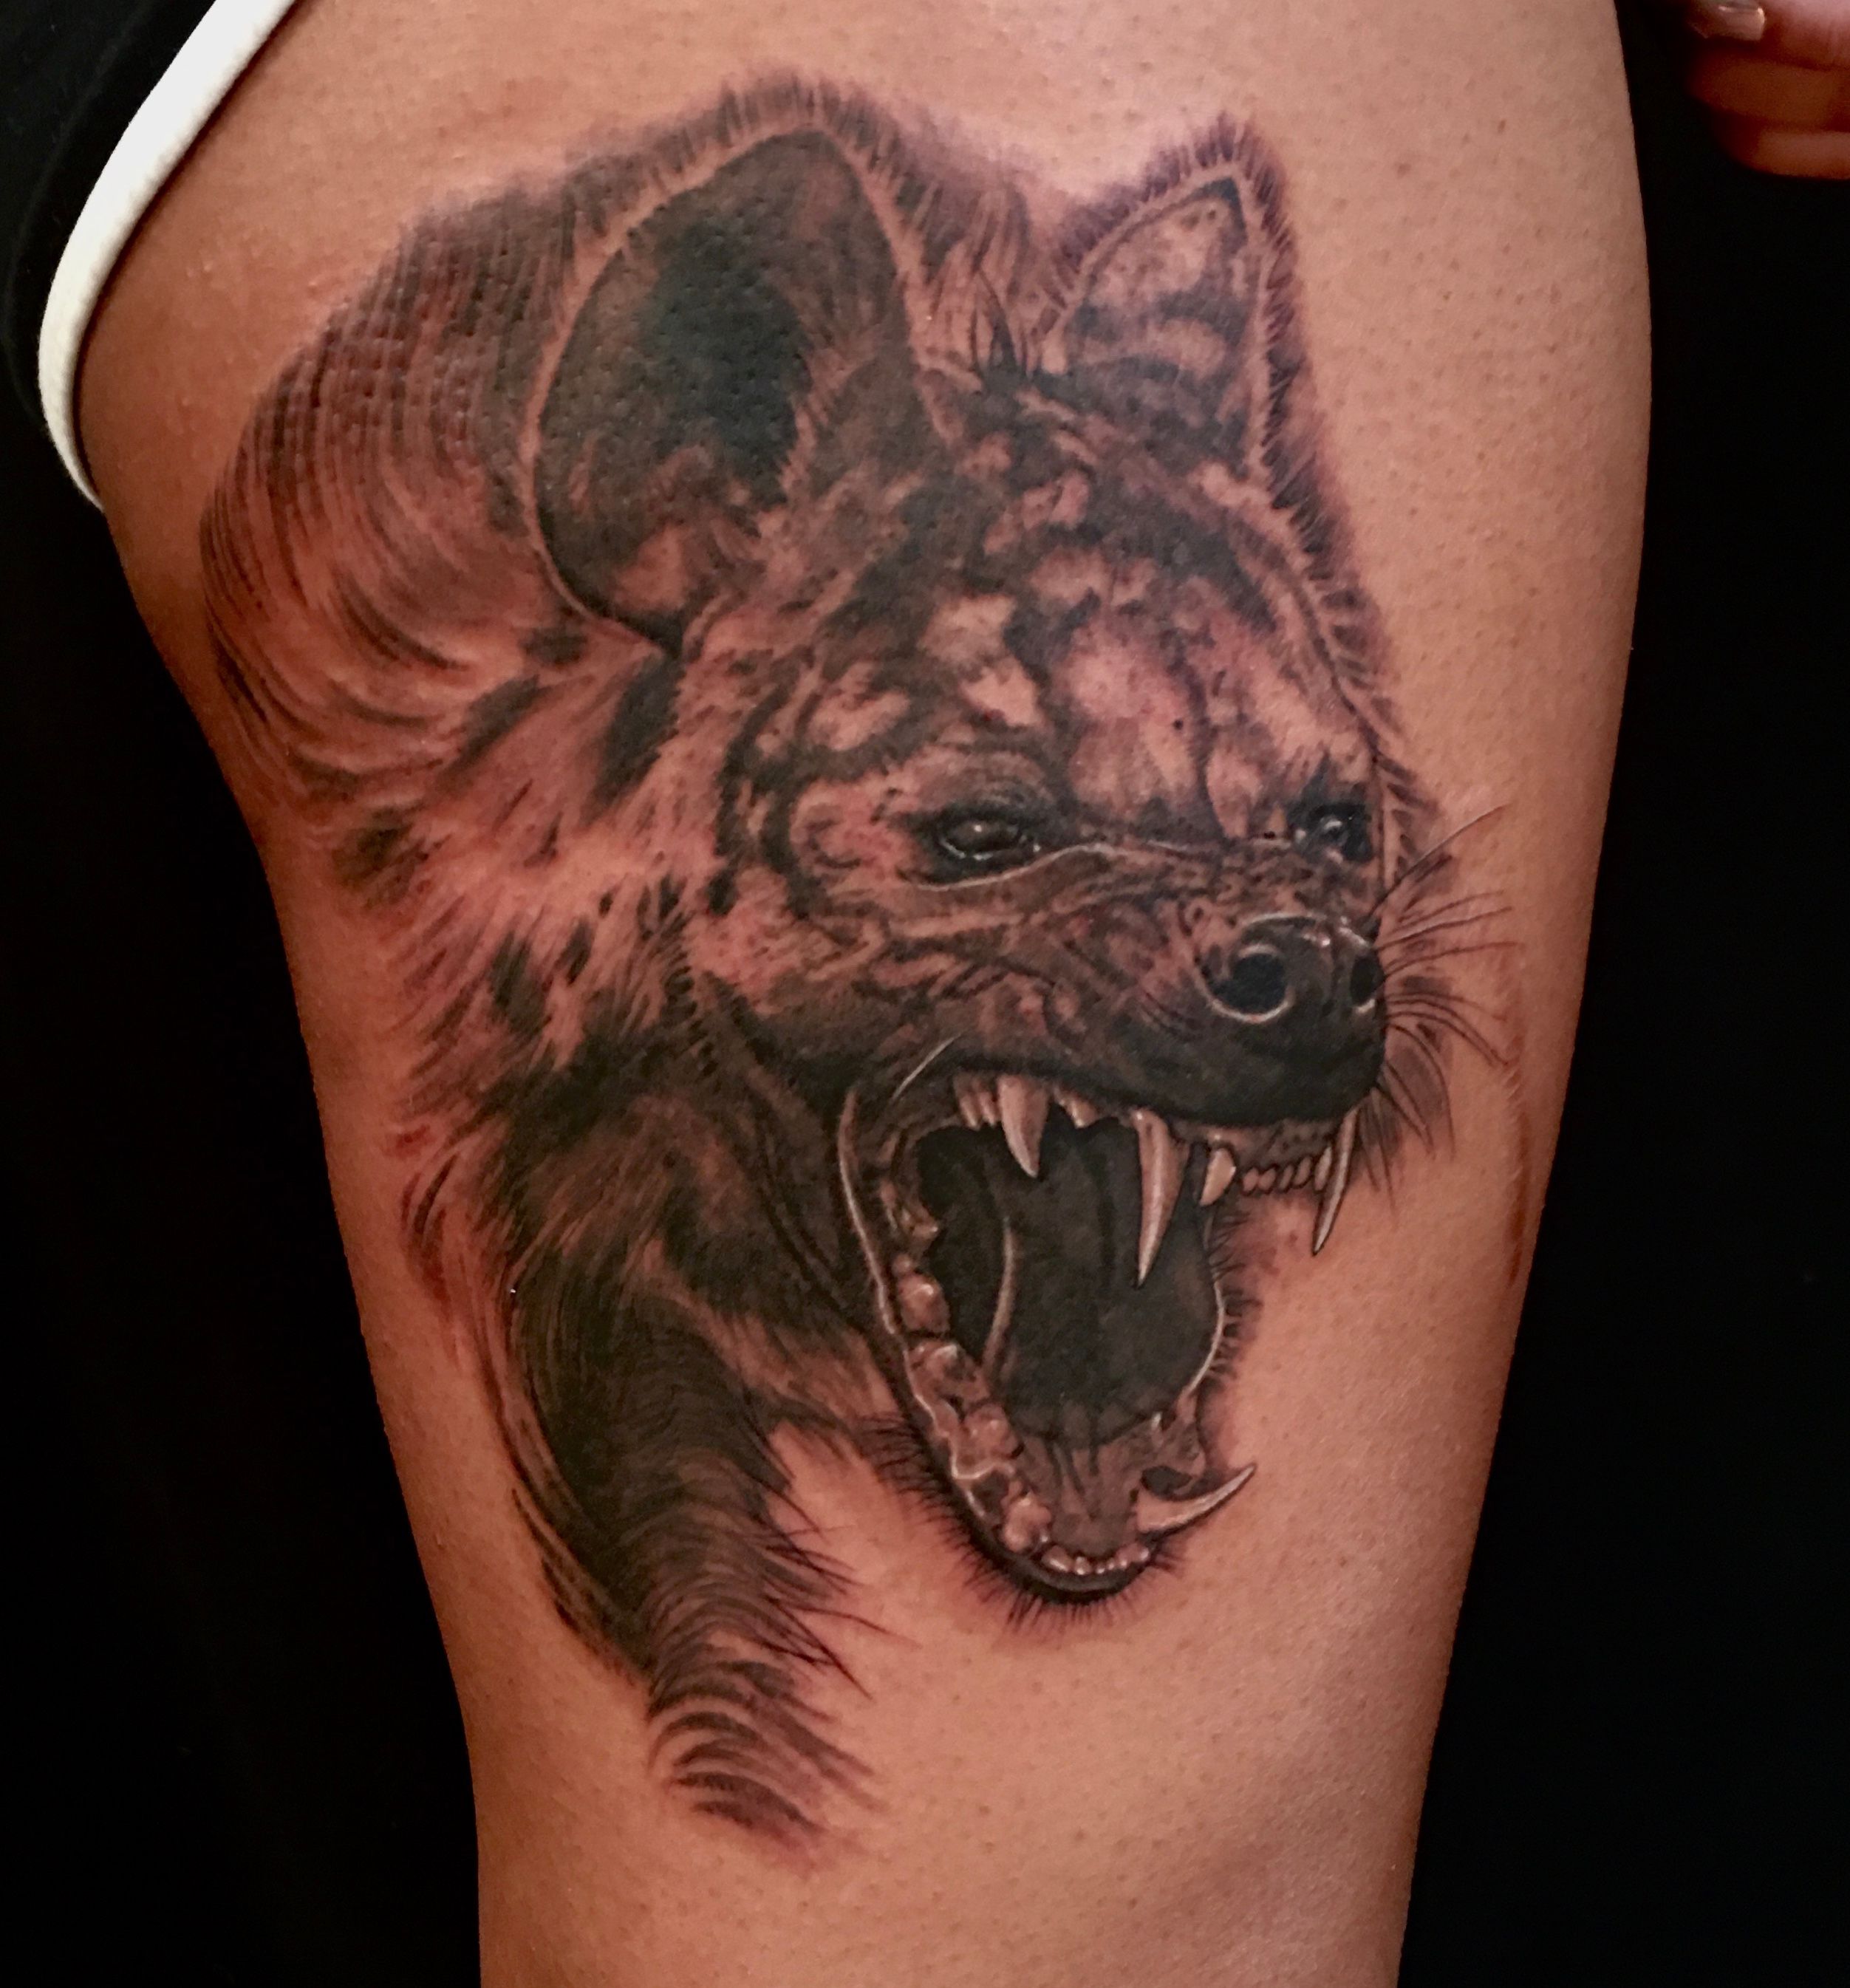 Recent tattoos  The Laughing Hyena